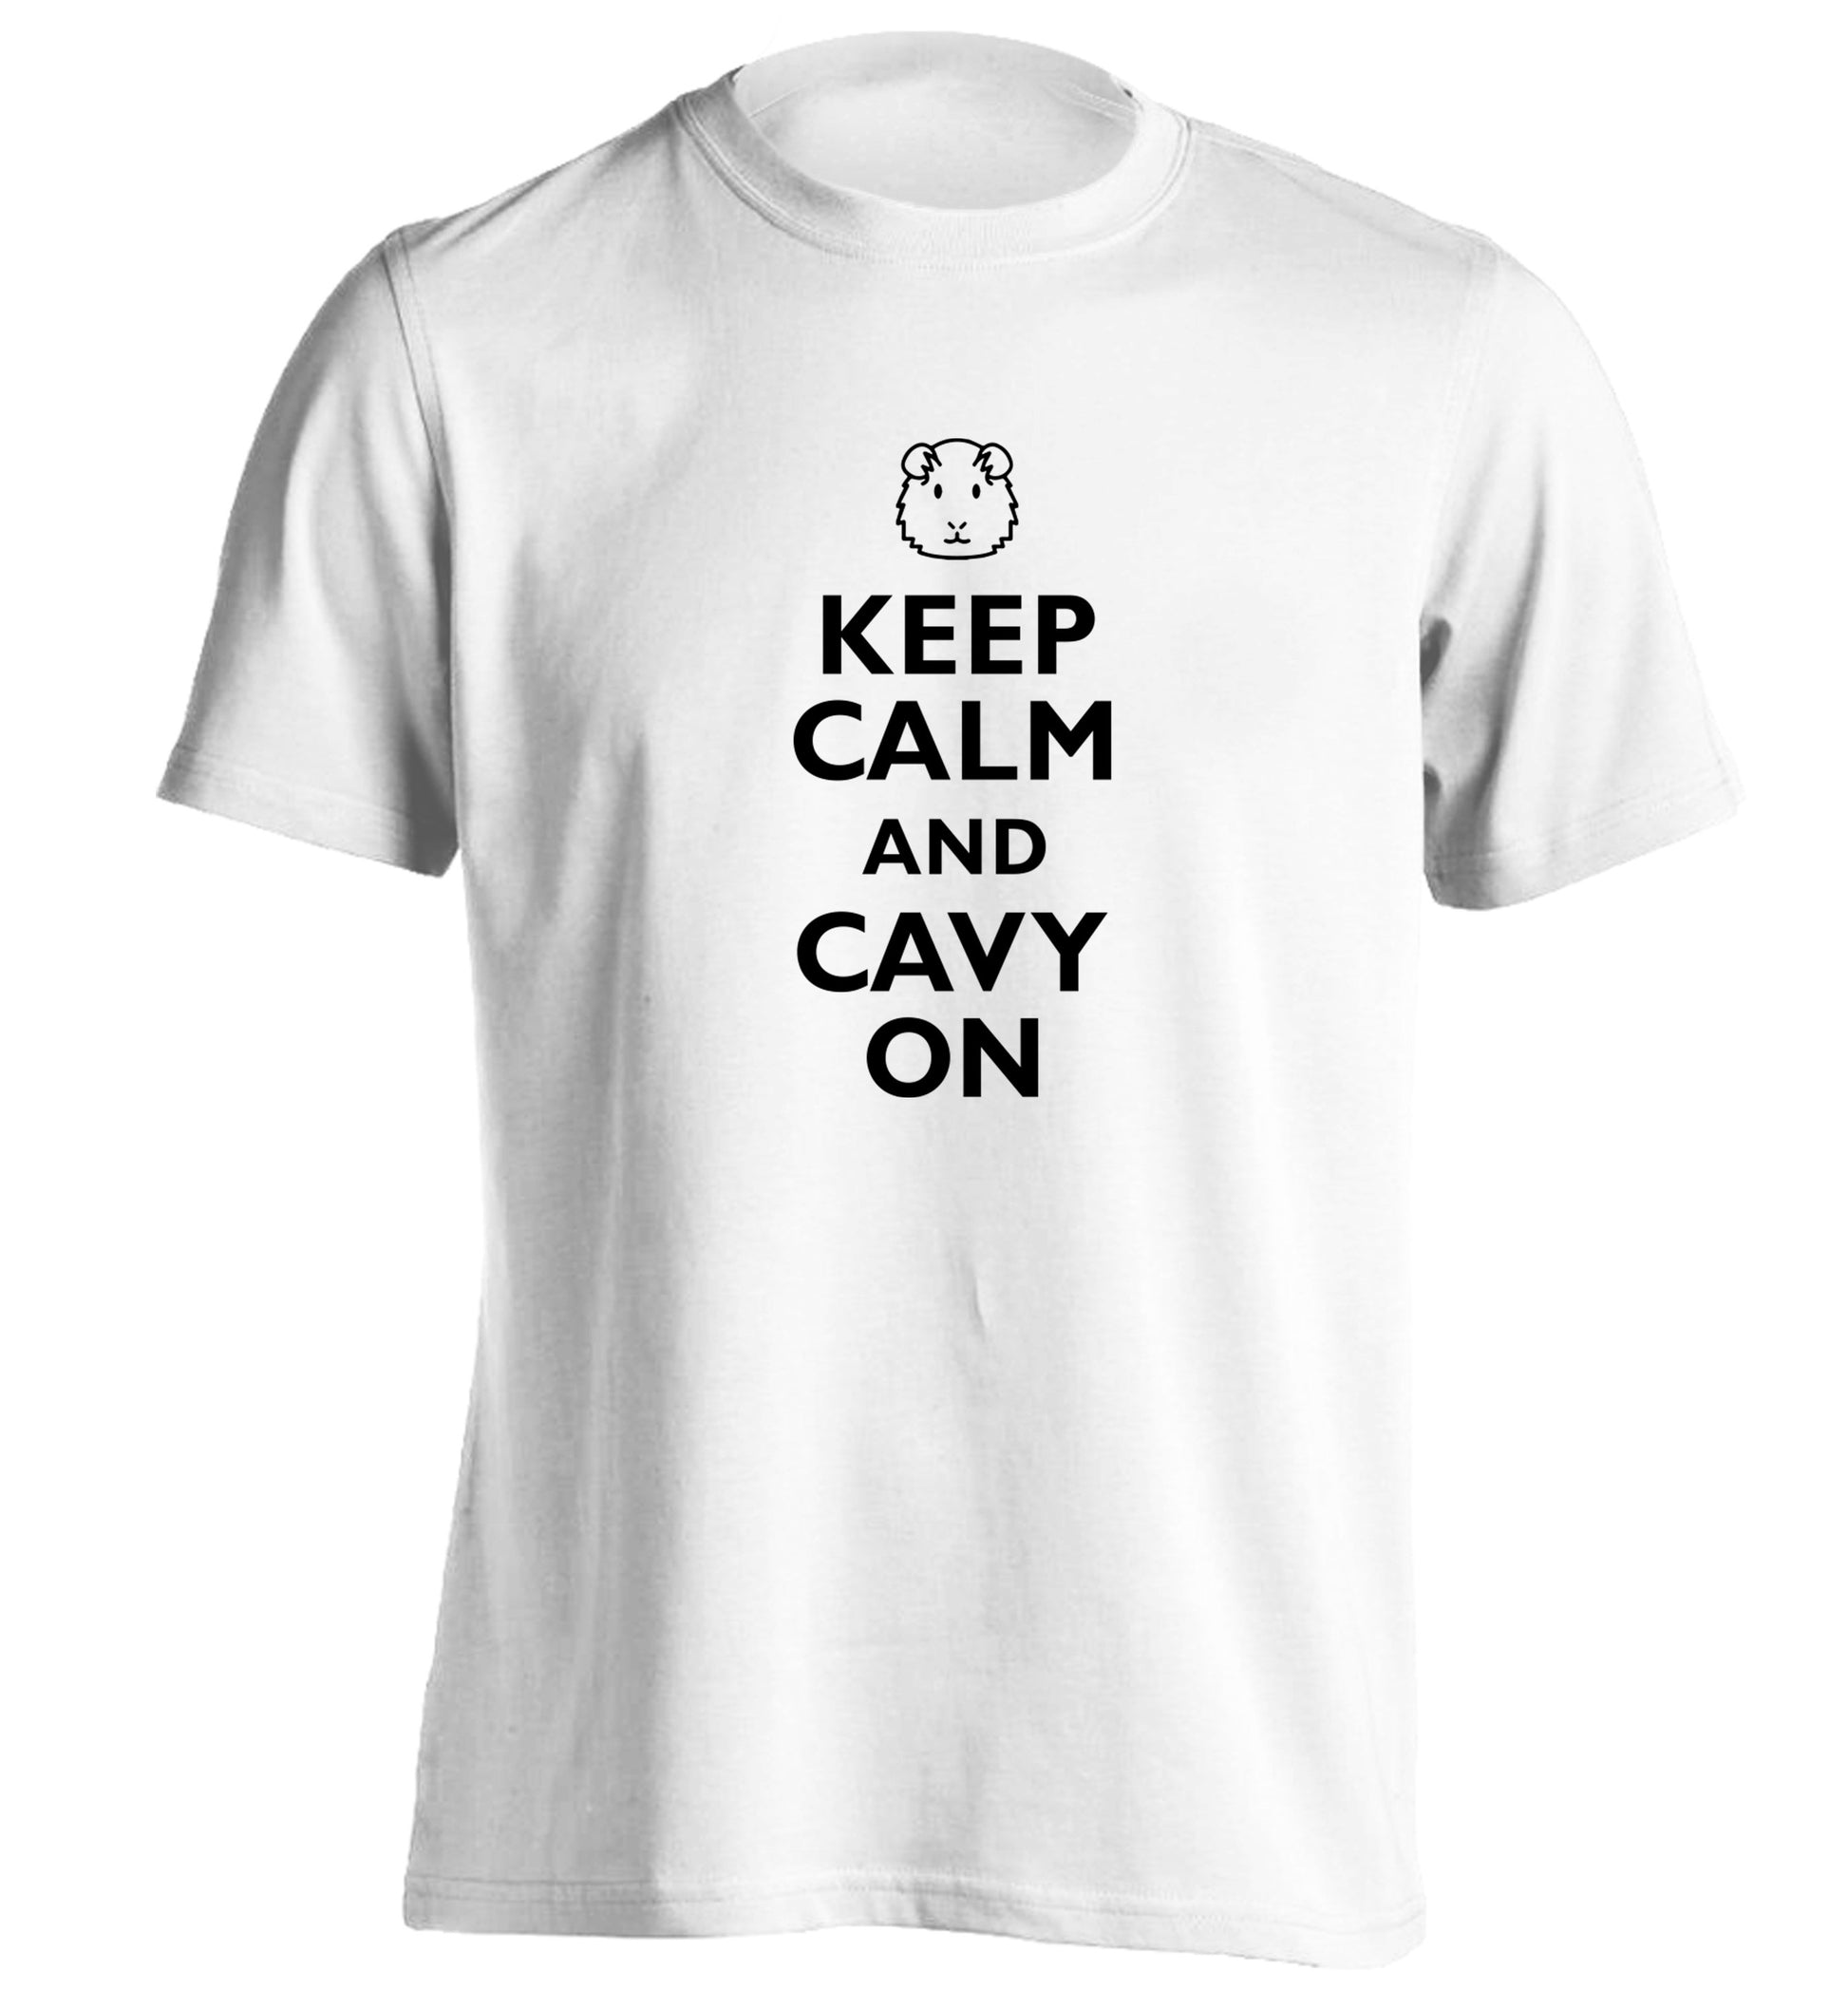 Keep calm and cavvy on adults unisex white Tshirt 2XL